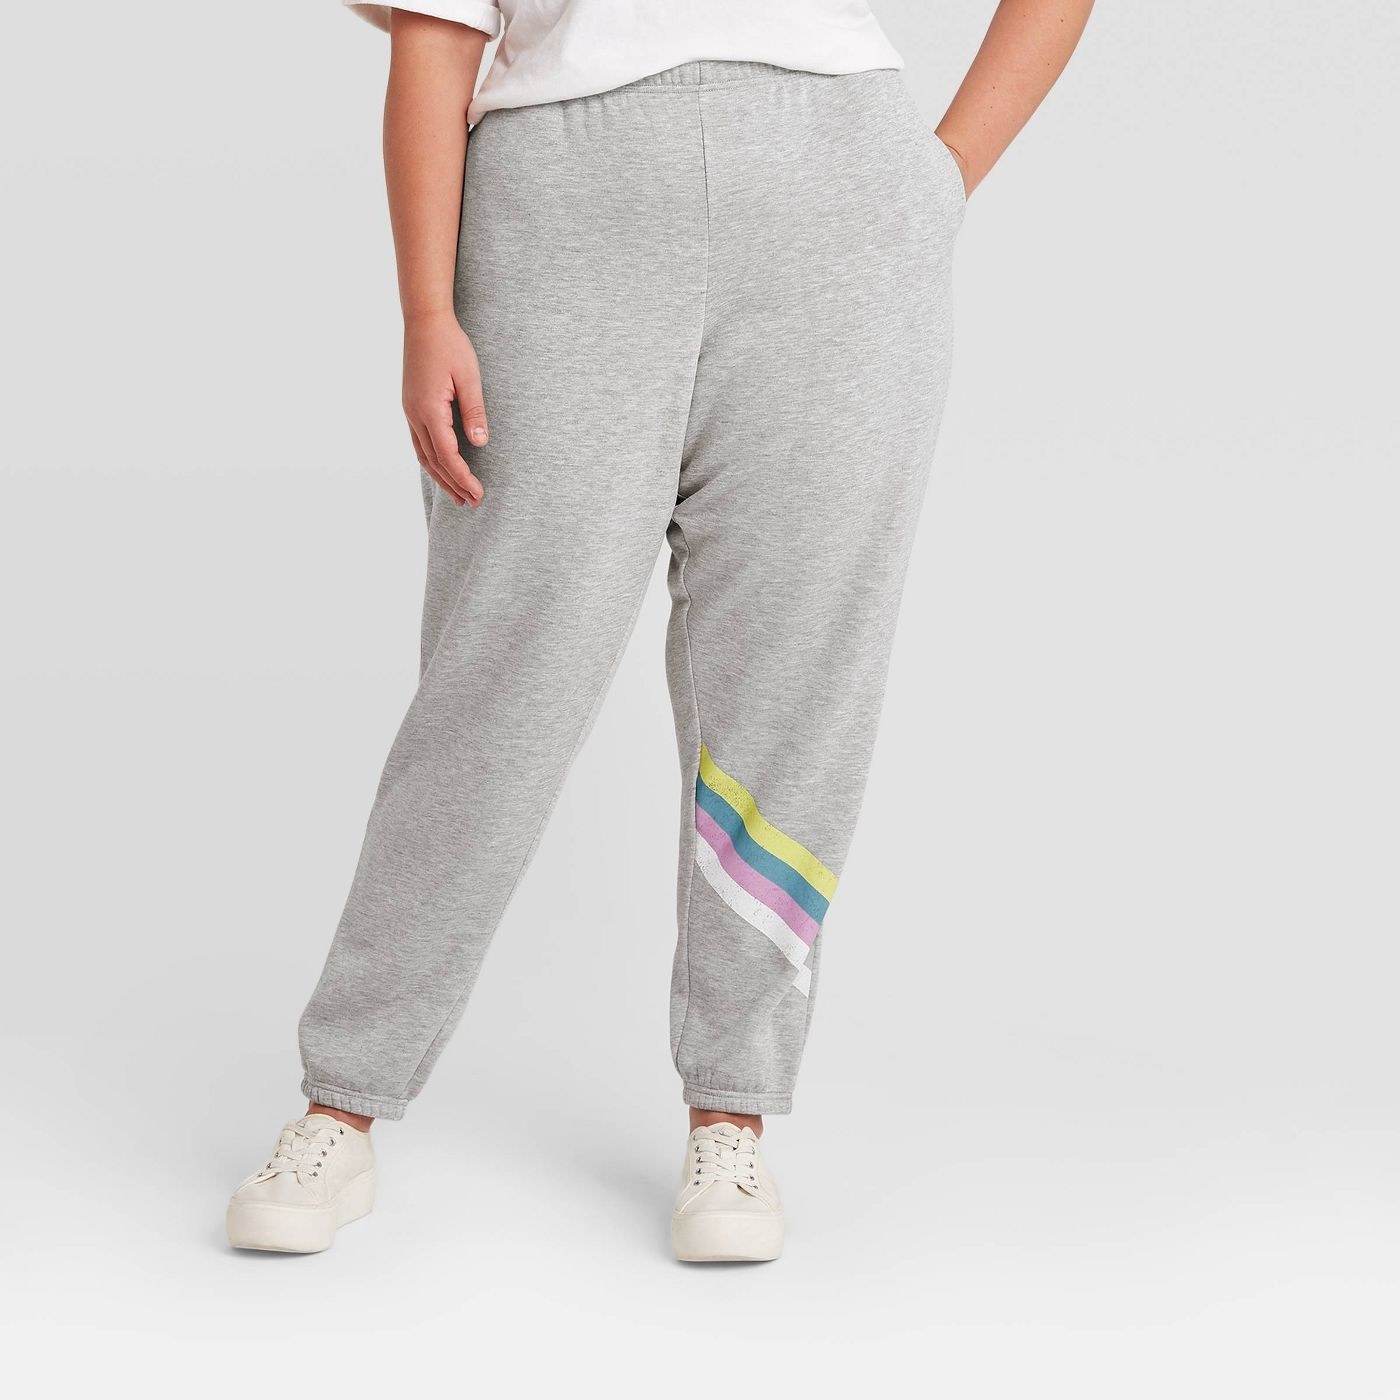 Model in gray joggers with colorful stripes on the leg